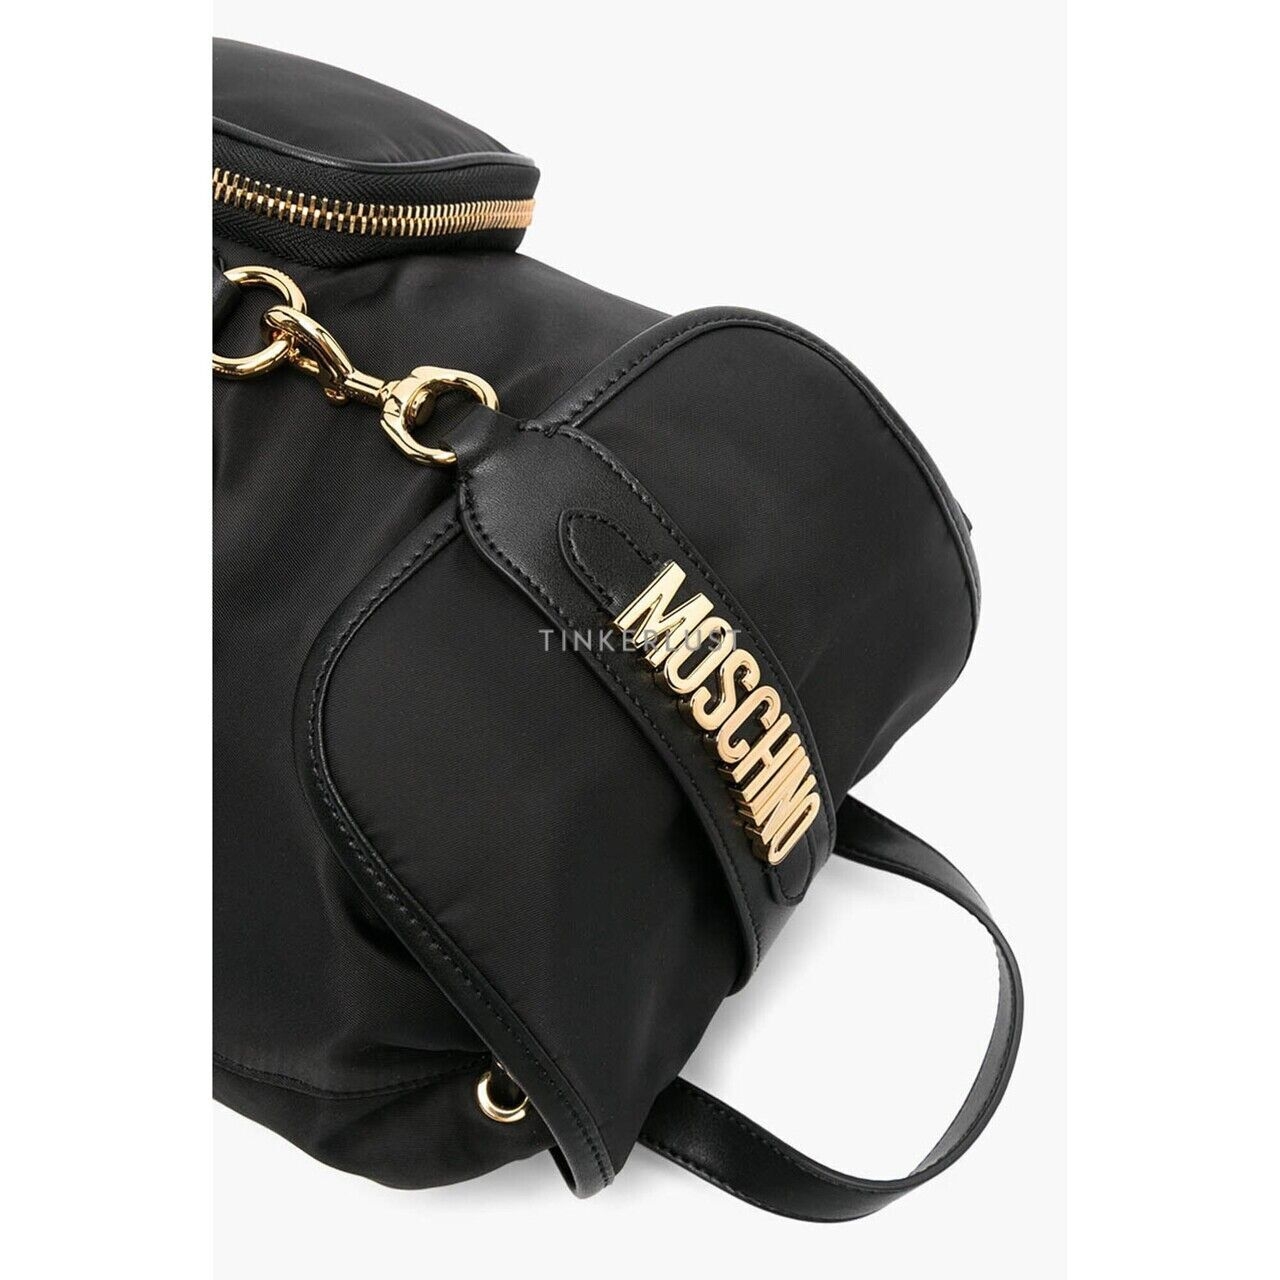 Moschino Women Logo Drawstring Backpack in Black GHW with Two Zip Pocket